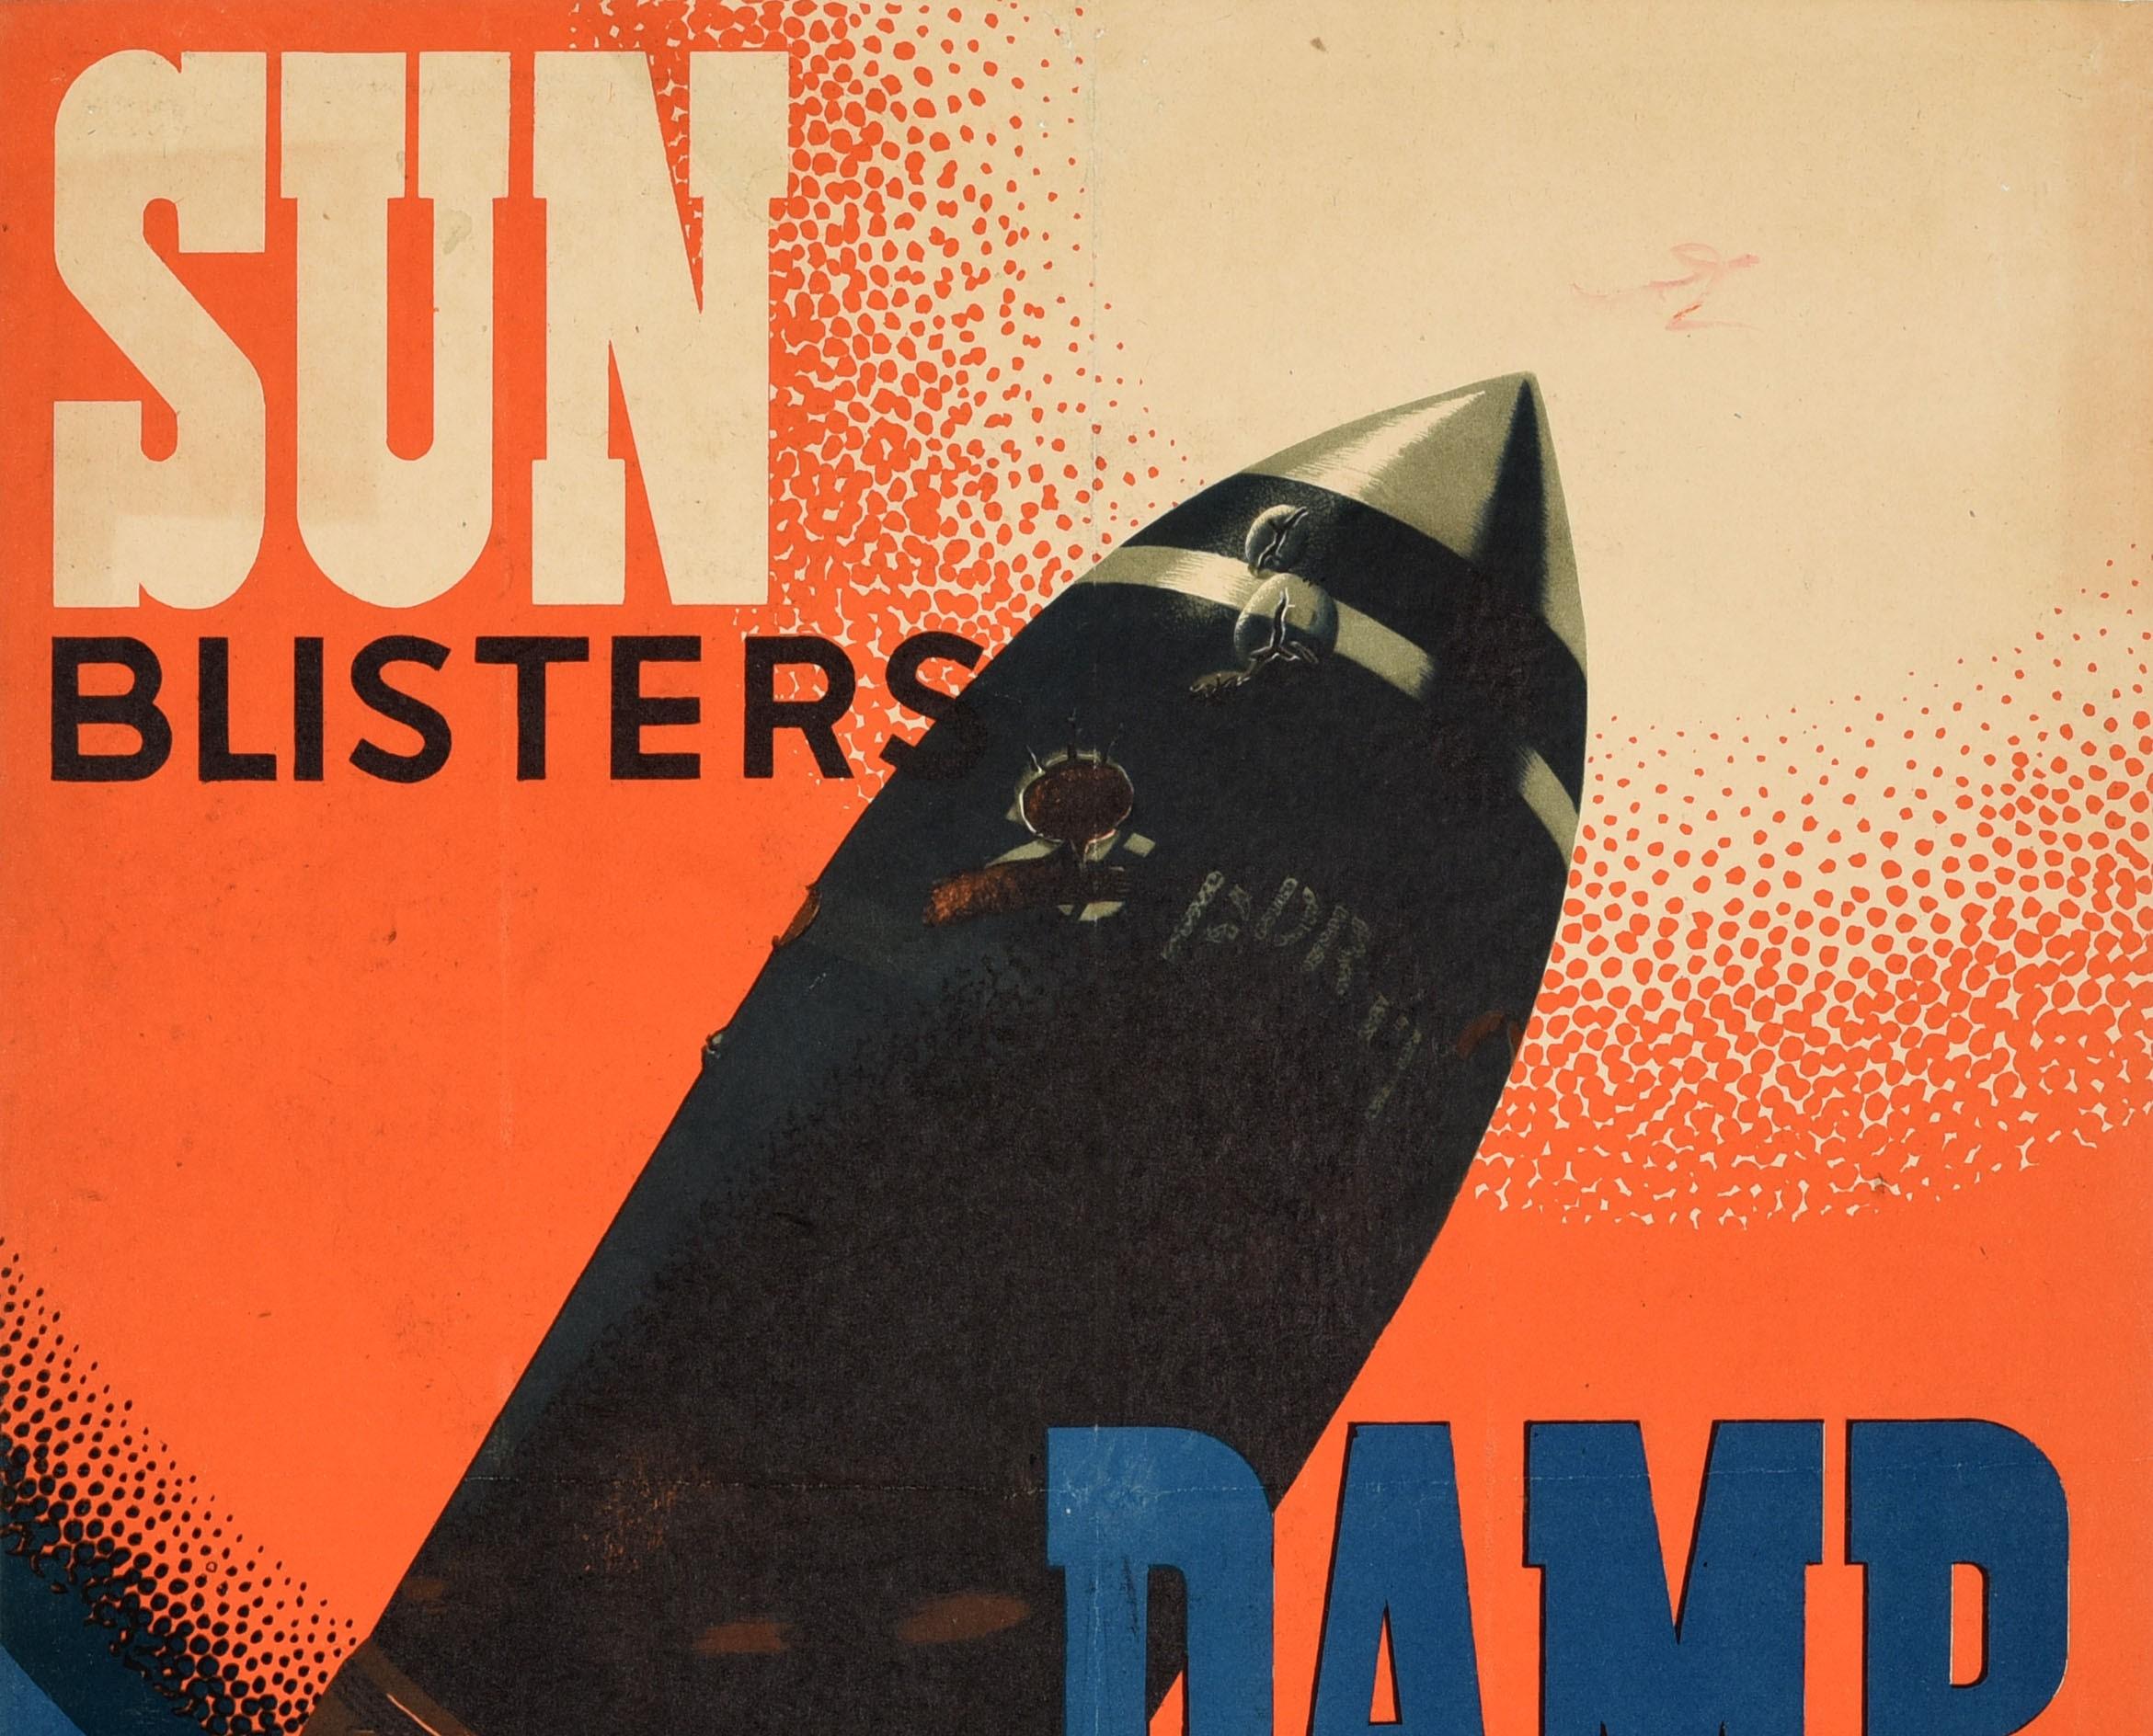 Original vintage World War Two safety propaganda poster - Sun Blisters Damp Rusts Ammunition Keep It Covered - featuring a dynamic design by the notable British poster artist Frank Newbould (1887-1951) of ammunition damaged by the heat and water on